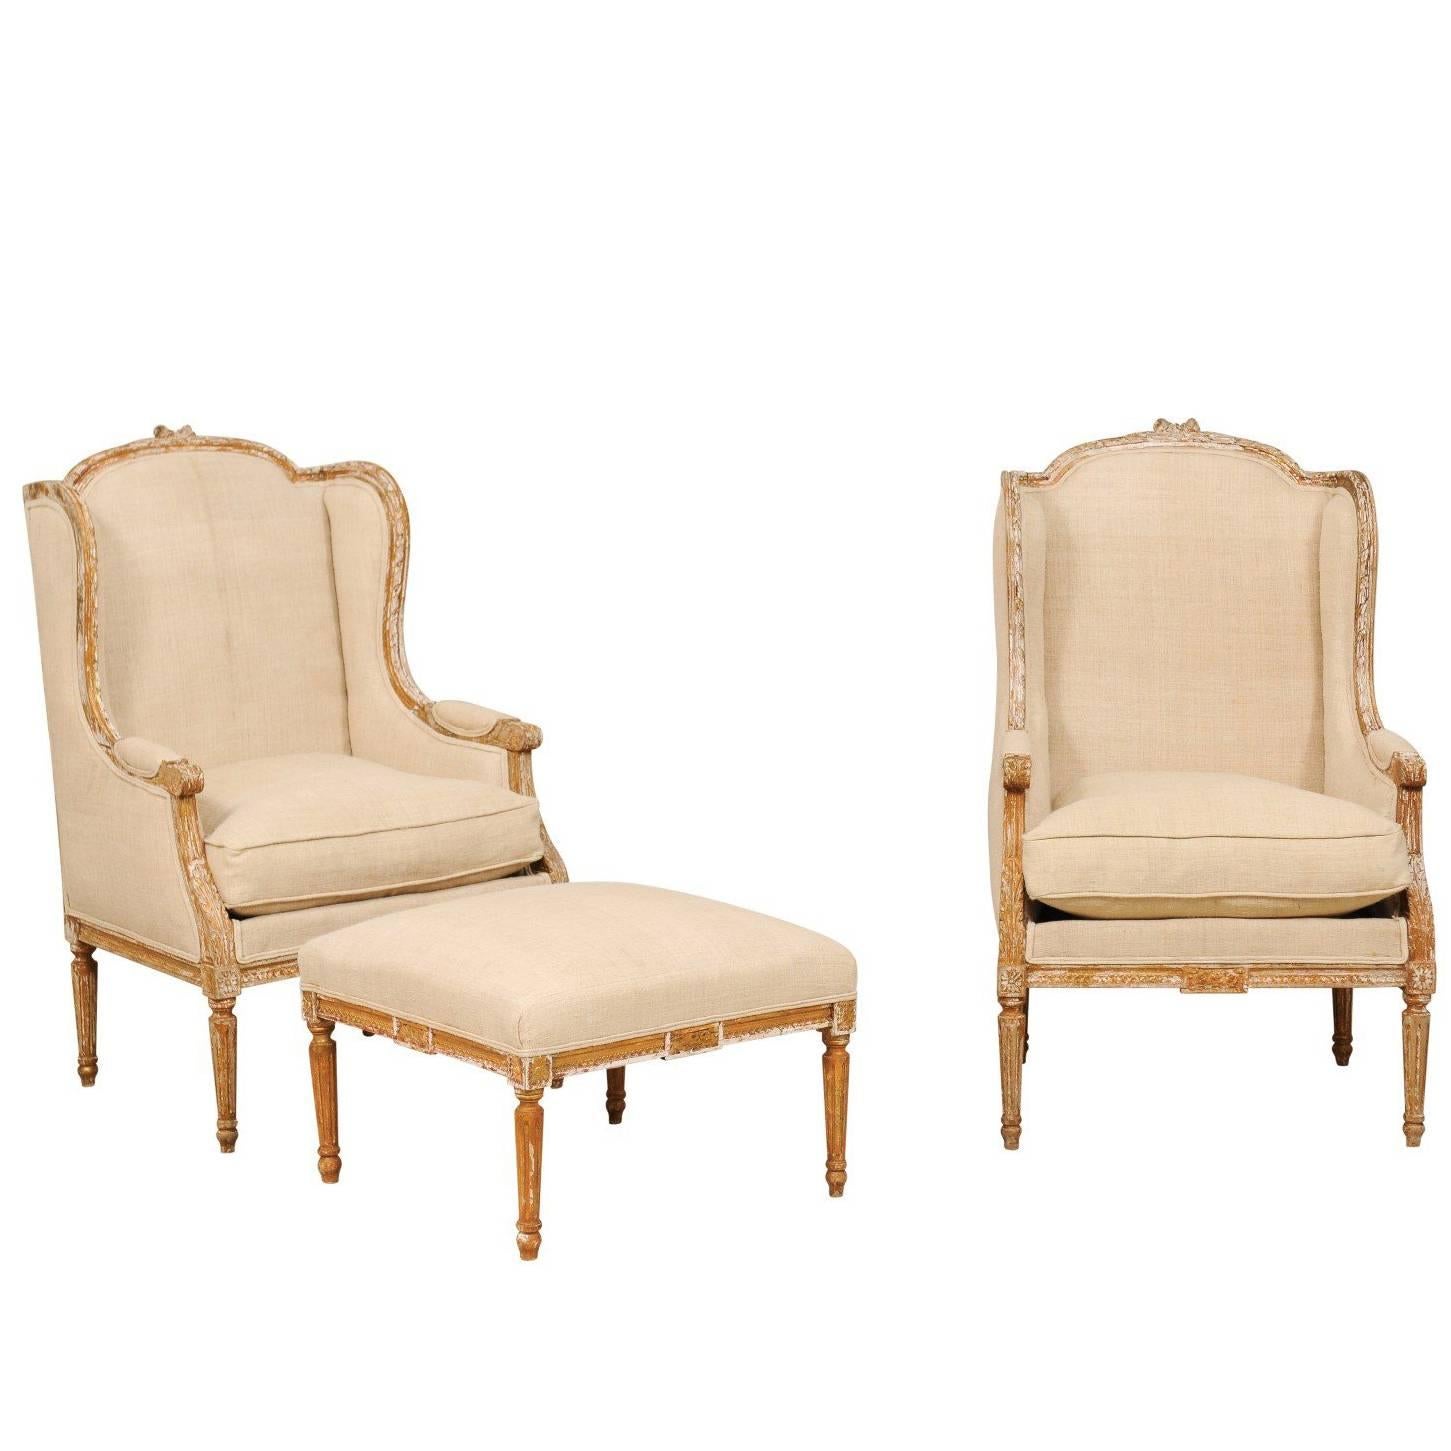 Pair of French Louis XVI Style Wood Wing-Back Bergère or Armchairs with Ottoman